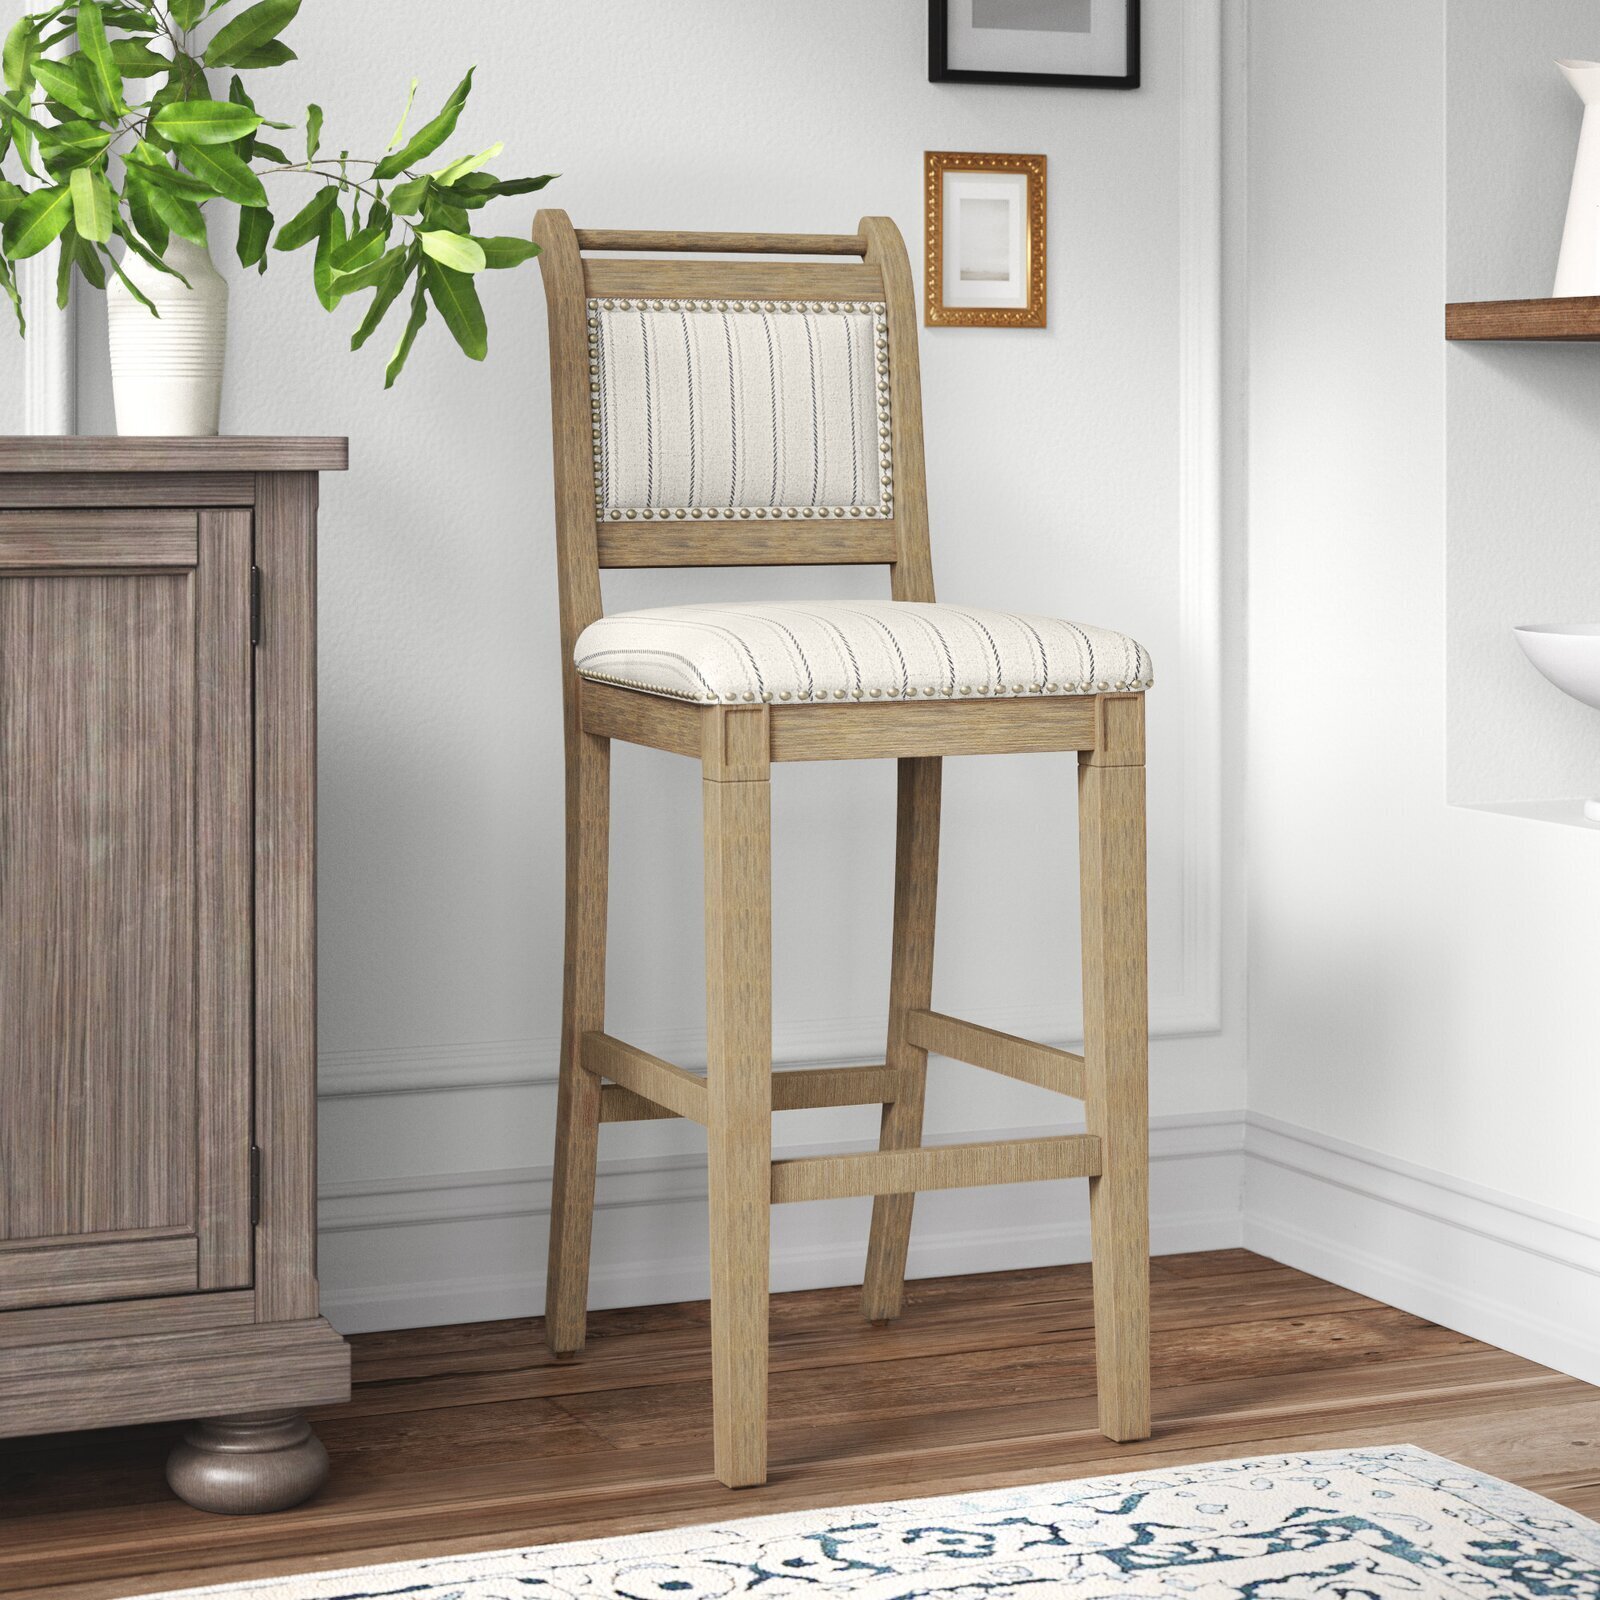 Square bar stools with back